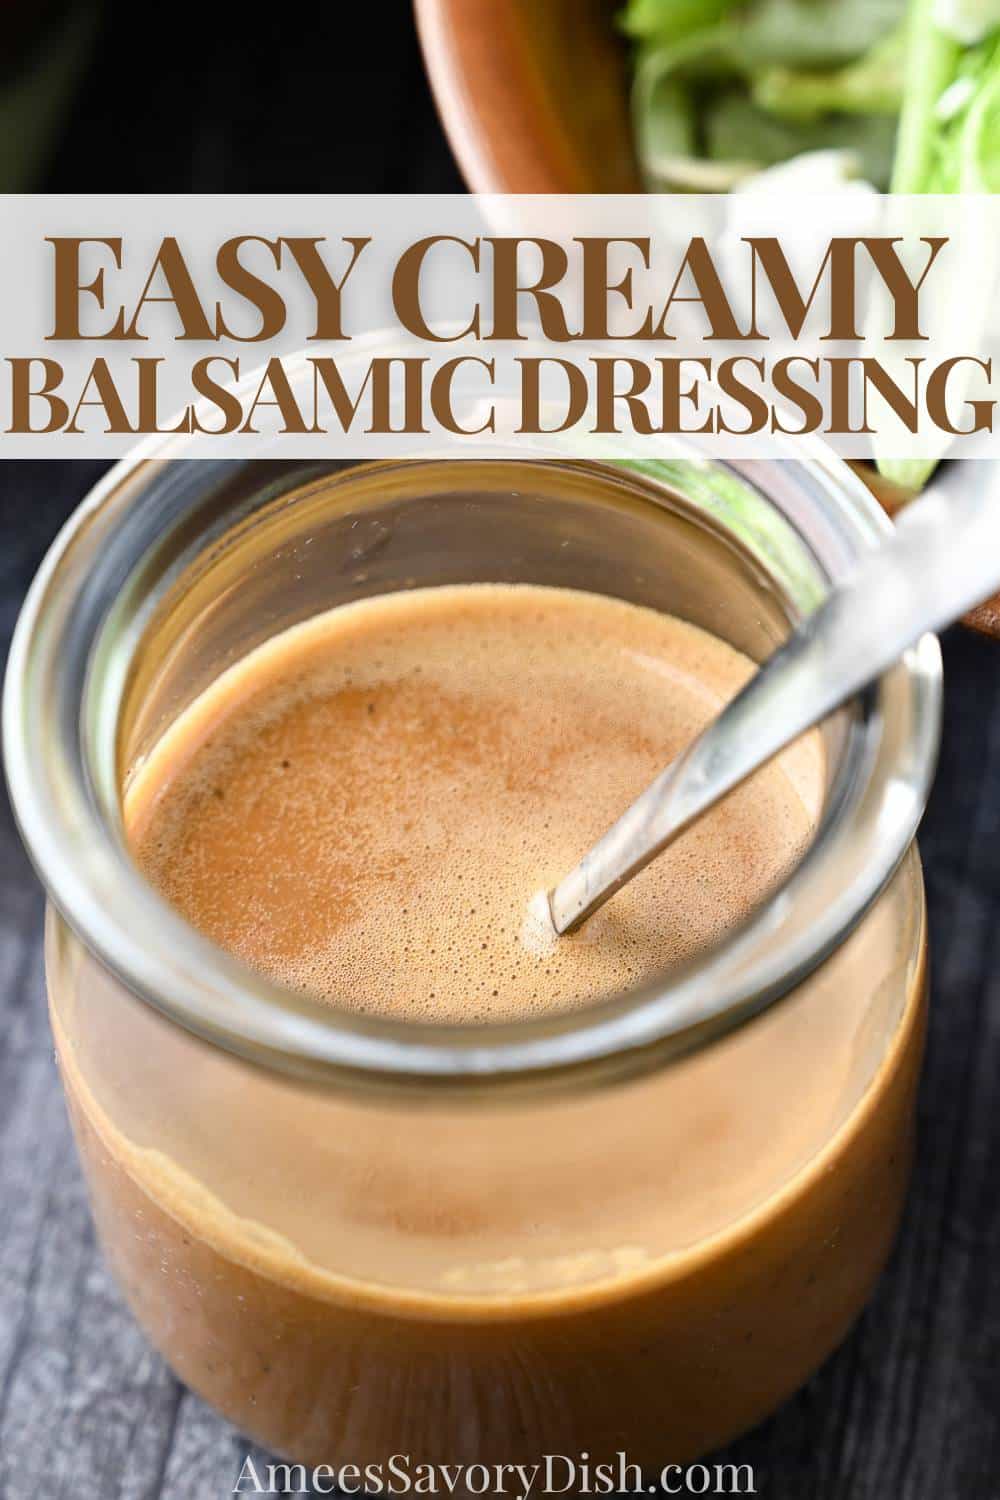 This simple and delicious Creamy Balsamic Dressing recipe has a shortlist of ingredients you may already have in your kitchen. Paleo-friendly option included. via @Ameessavorydish